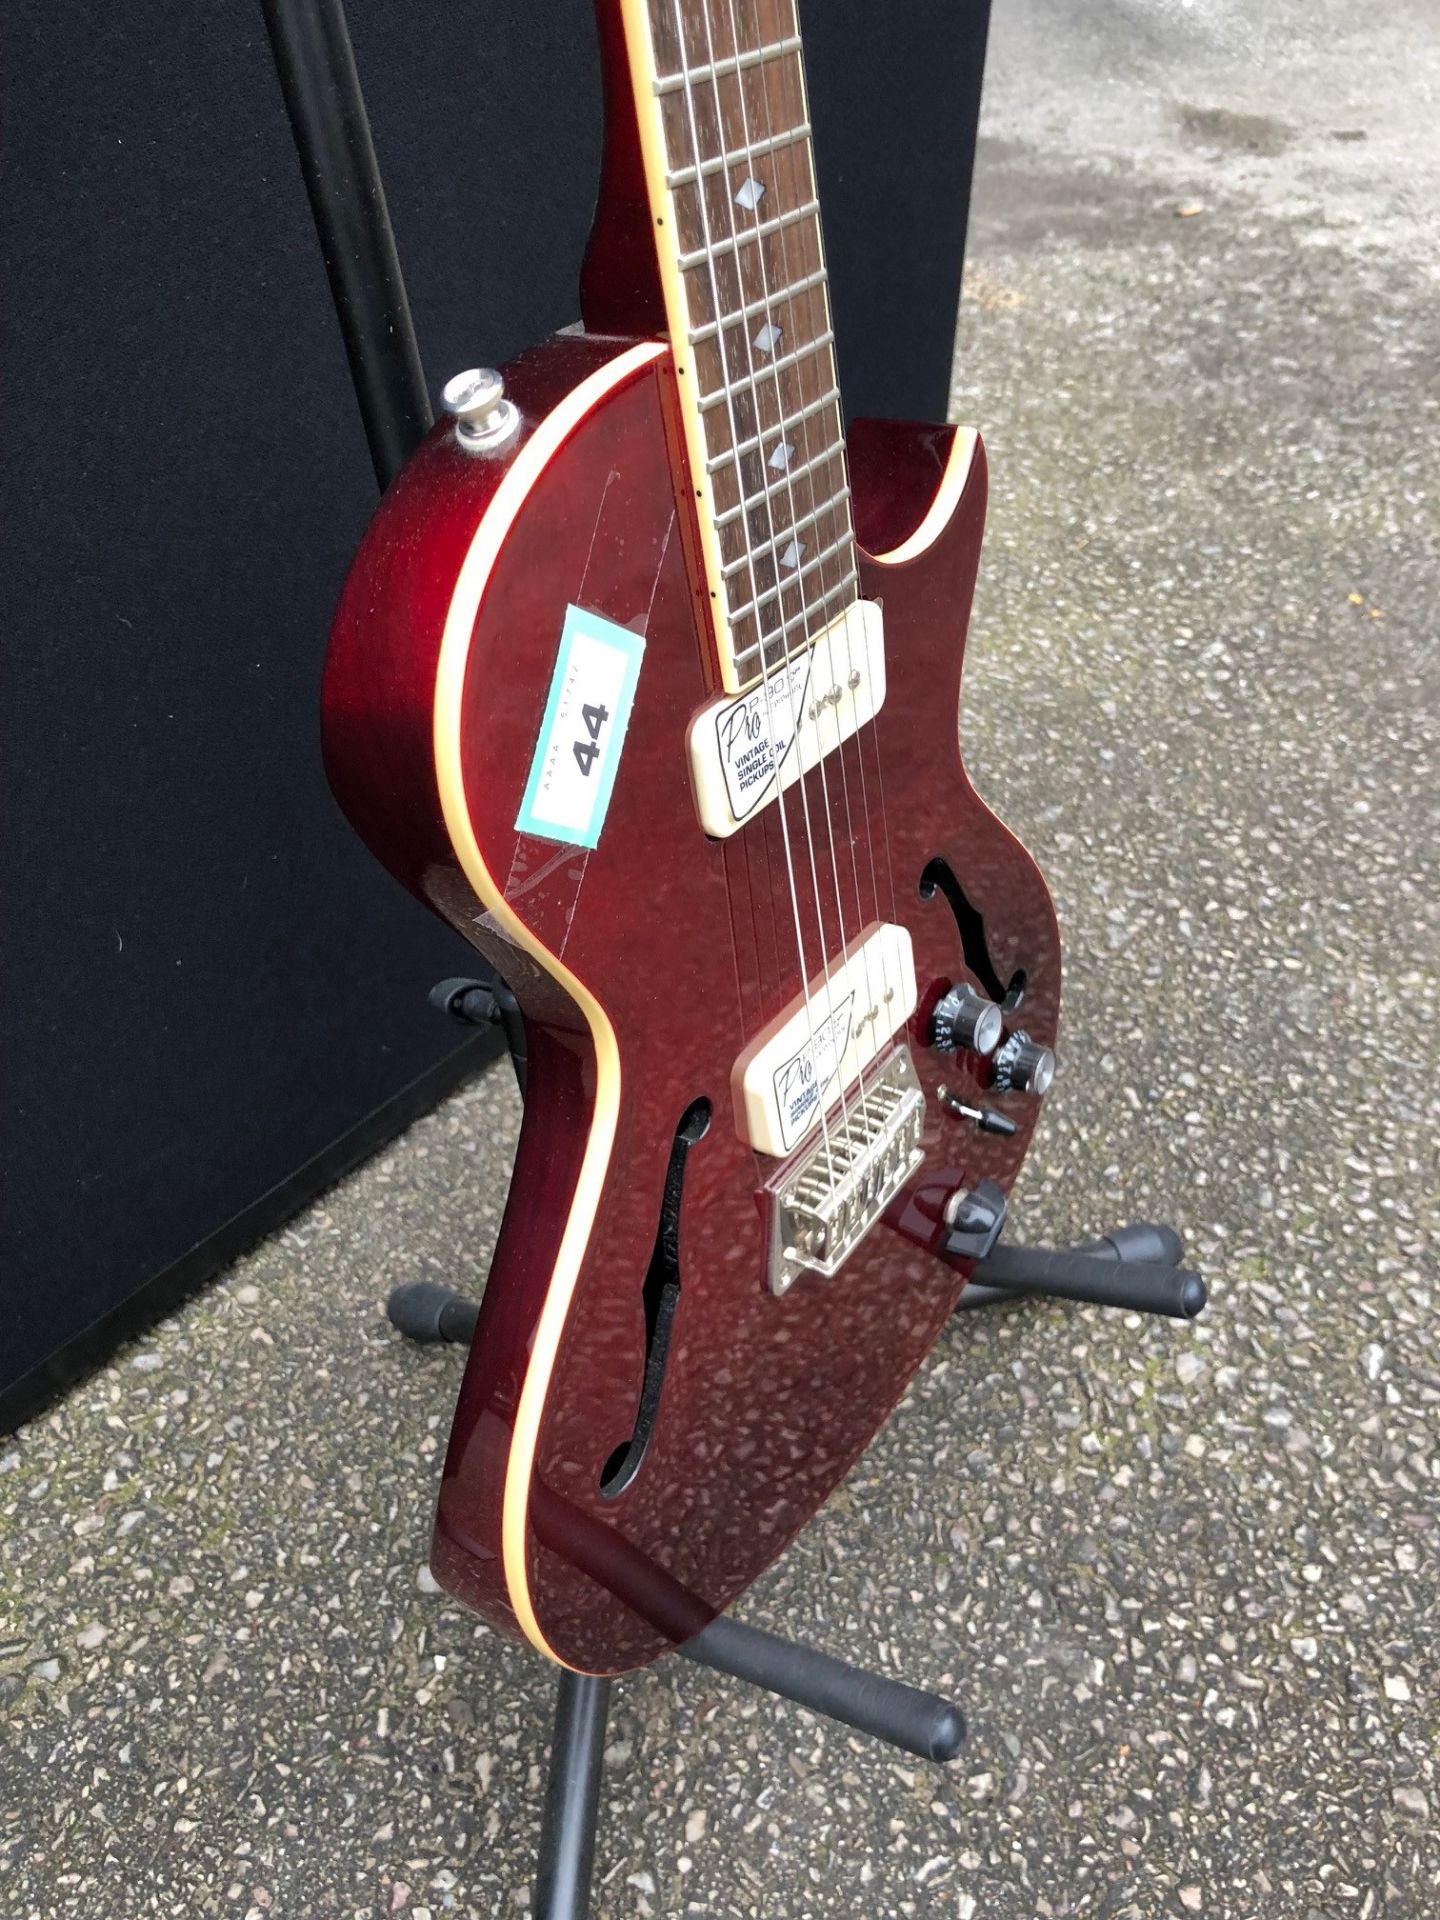 Epiphone Blueshawk Deluxe Wine Red Electric Guitar (Brand New Ex Display - RRP £499.00) - Image 6 of 6